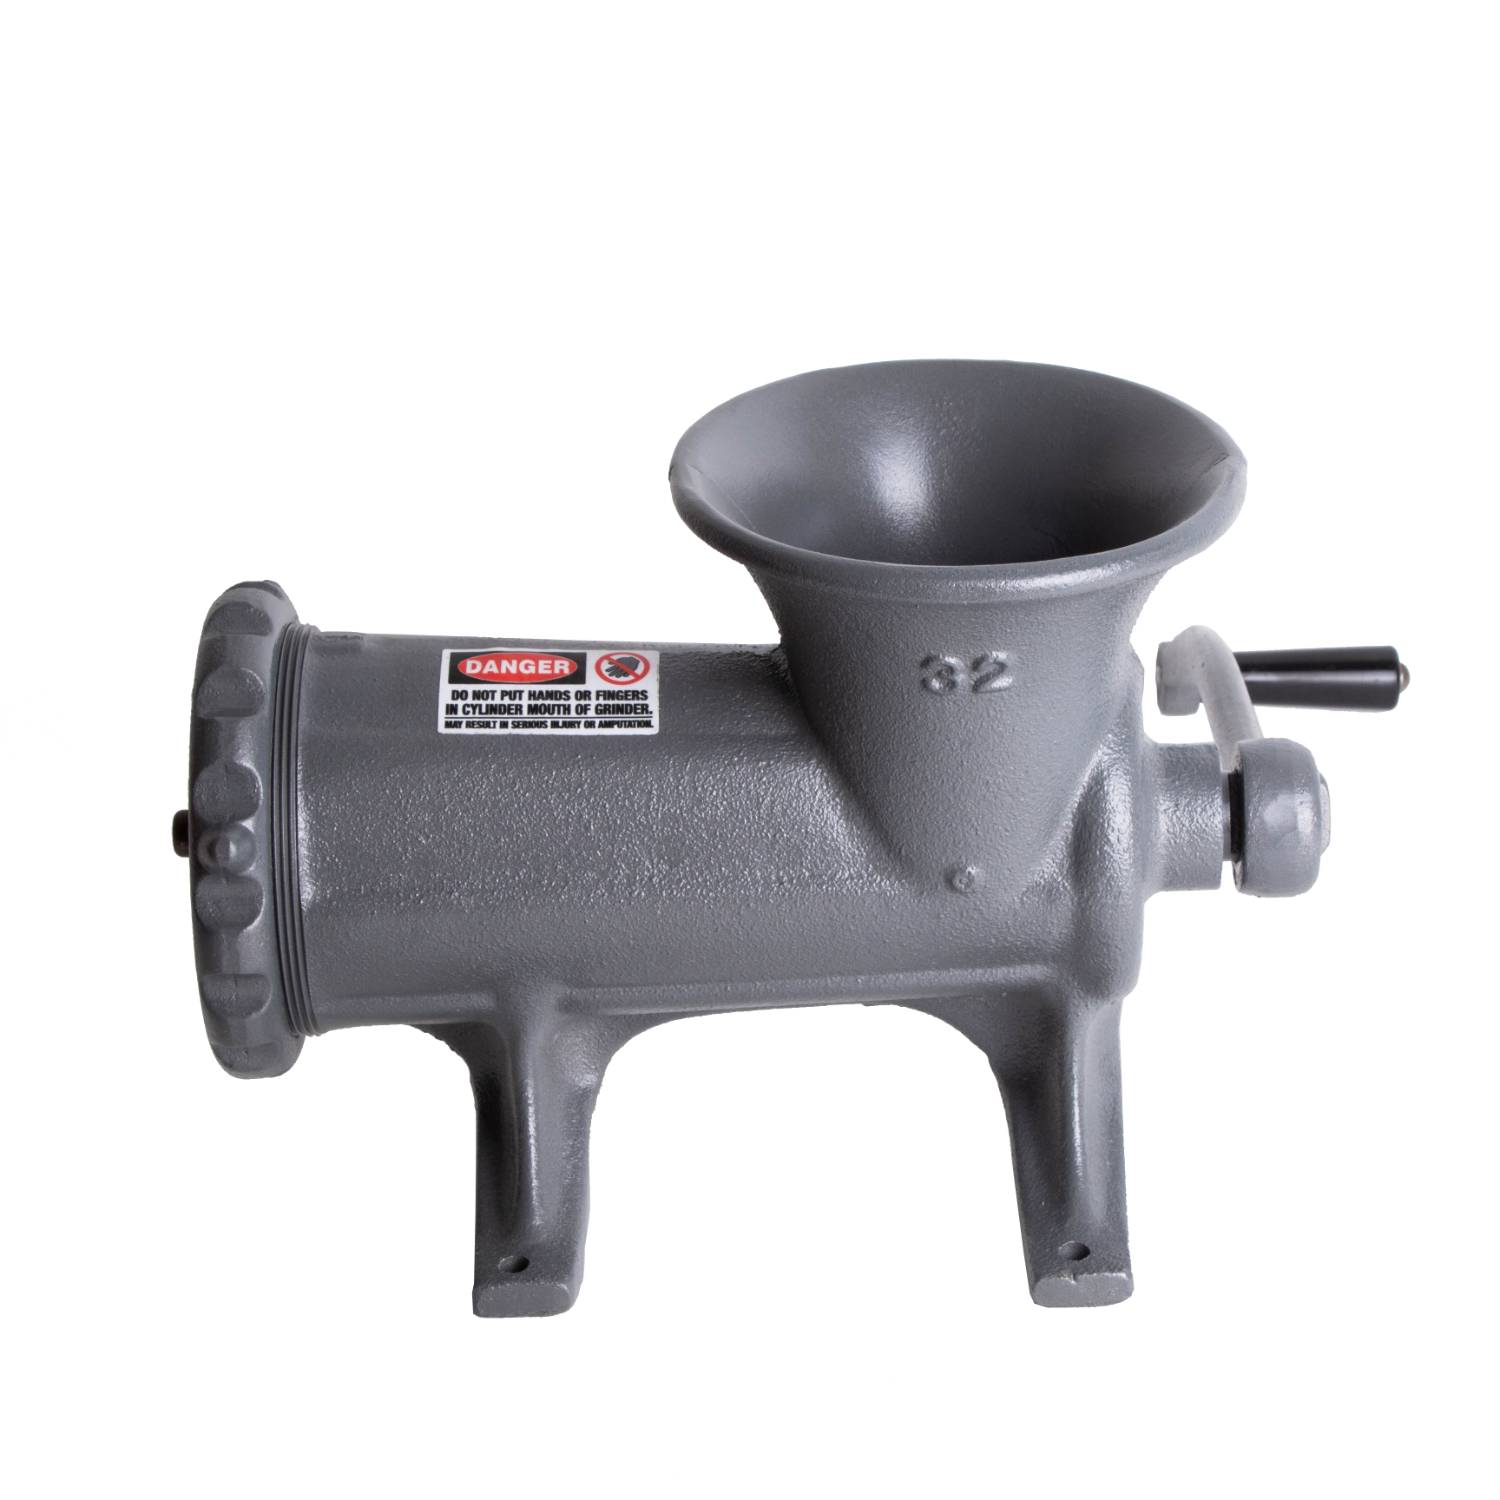 Chop Rite Clamp-Down Meat Grinder Model 10, Size: One Size